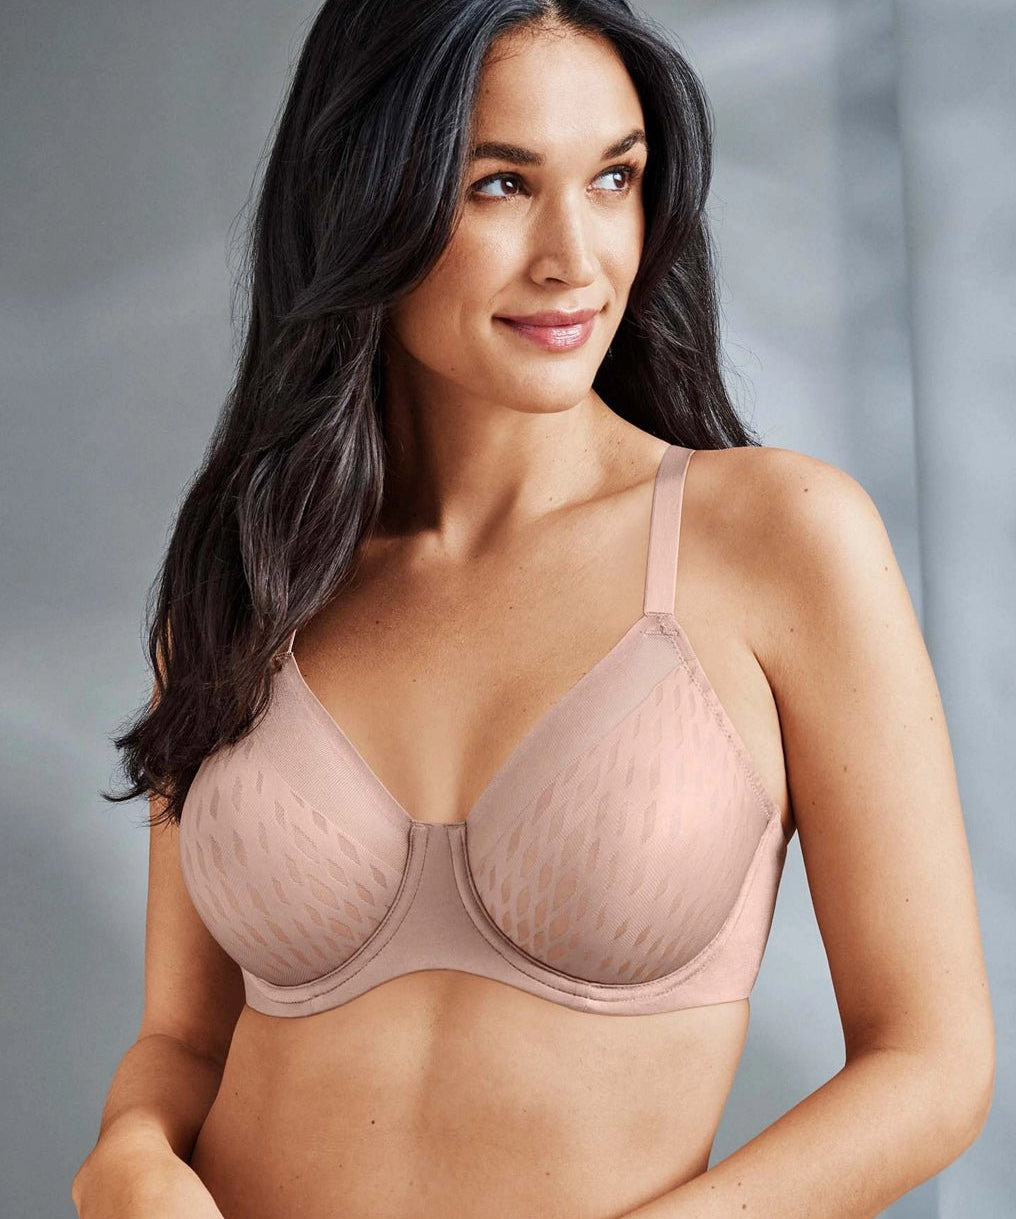 Elevated Allure 855336 wire free bra by Wacoal - Roebuck - Blue Sky Fashions & Lingerie